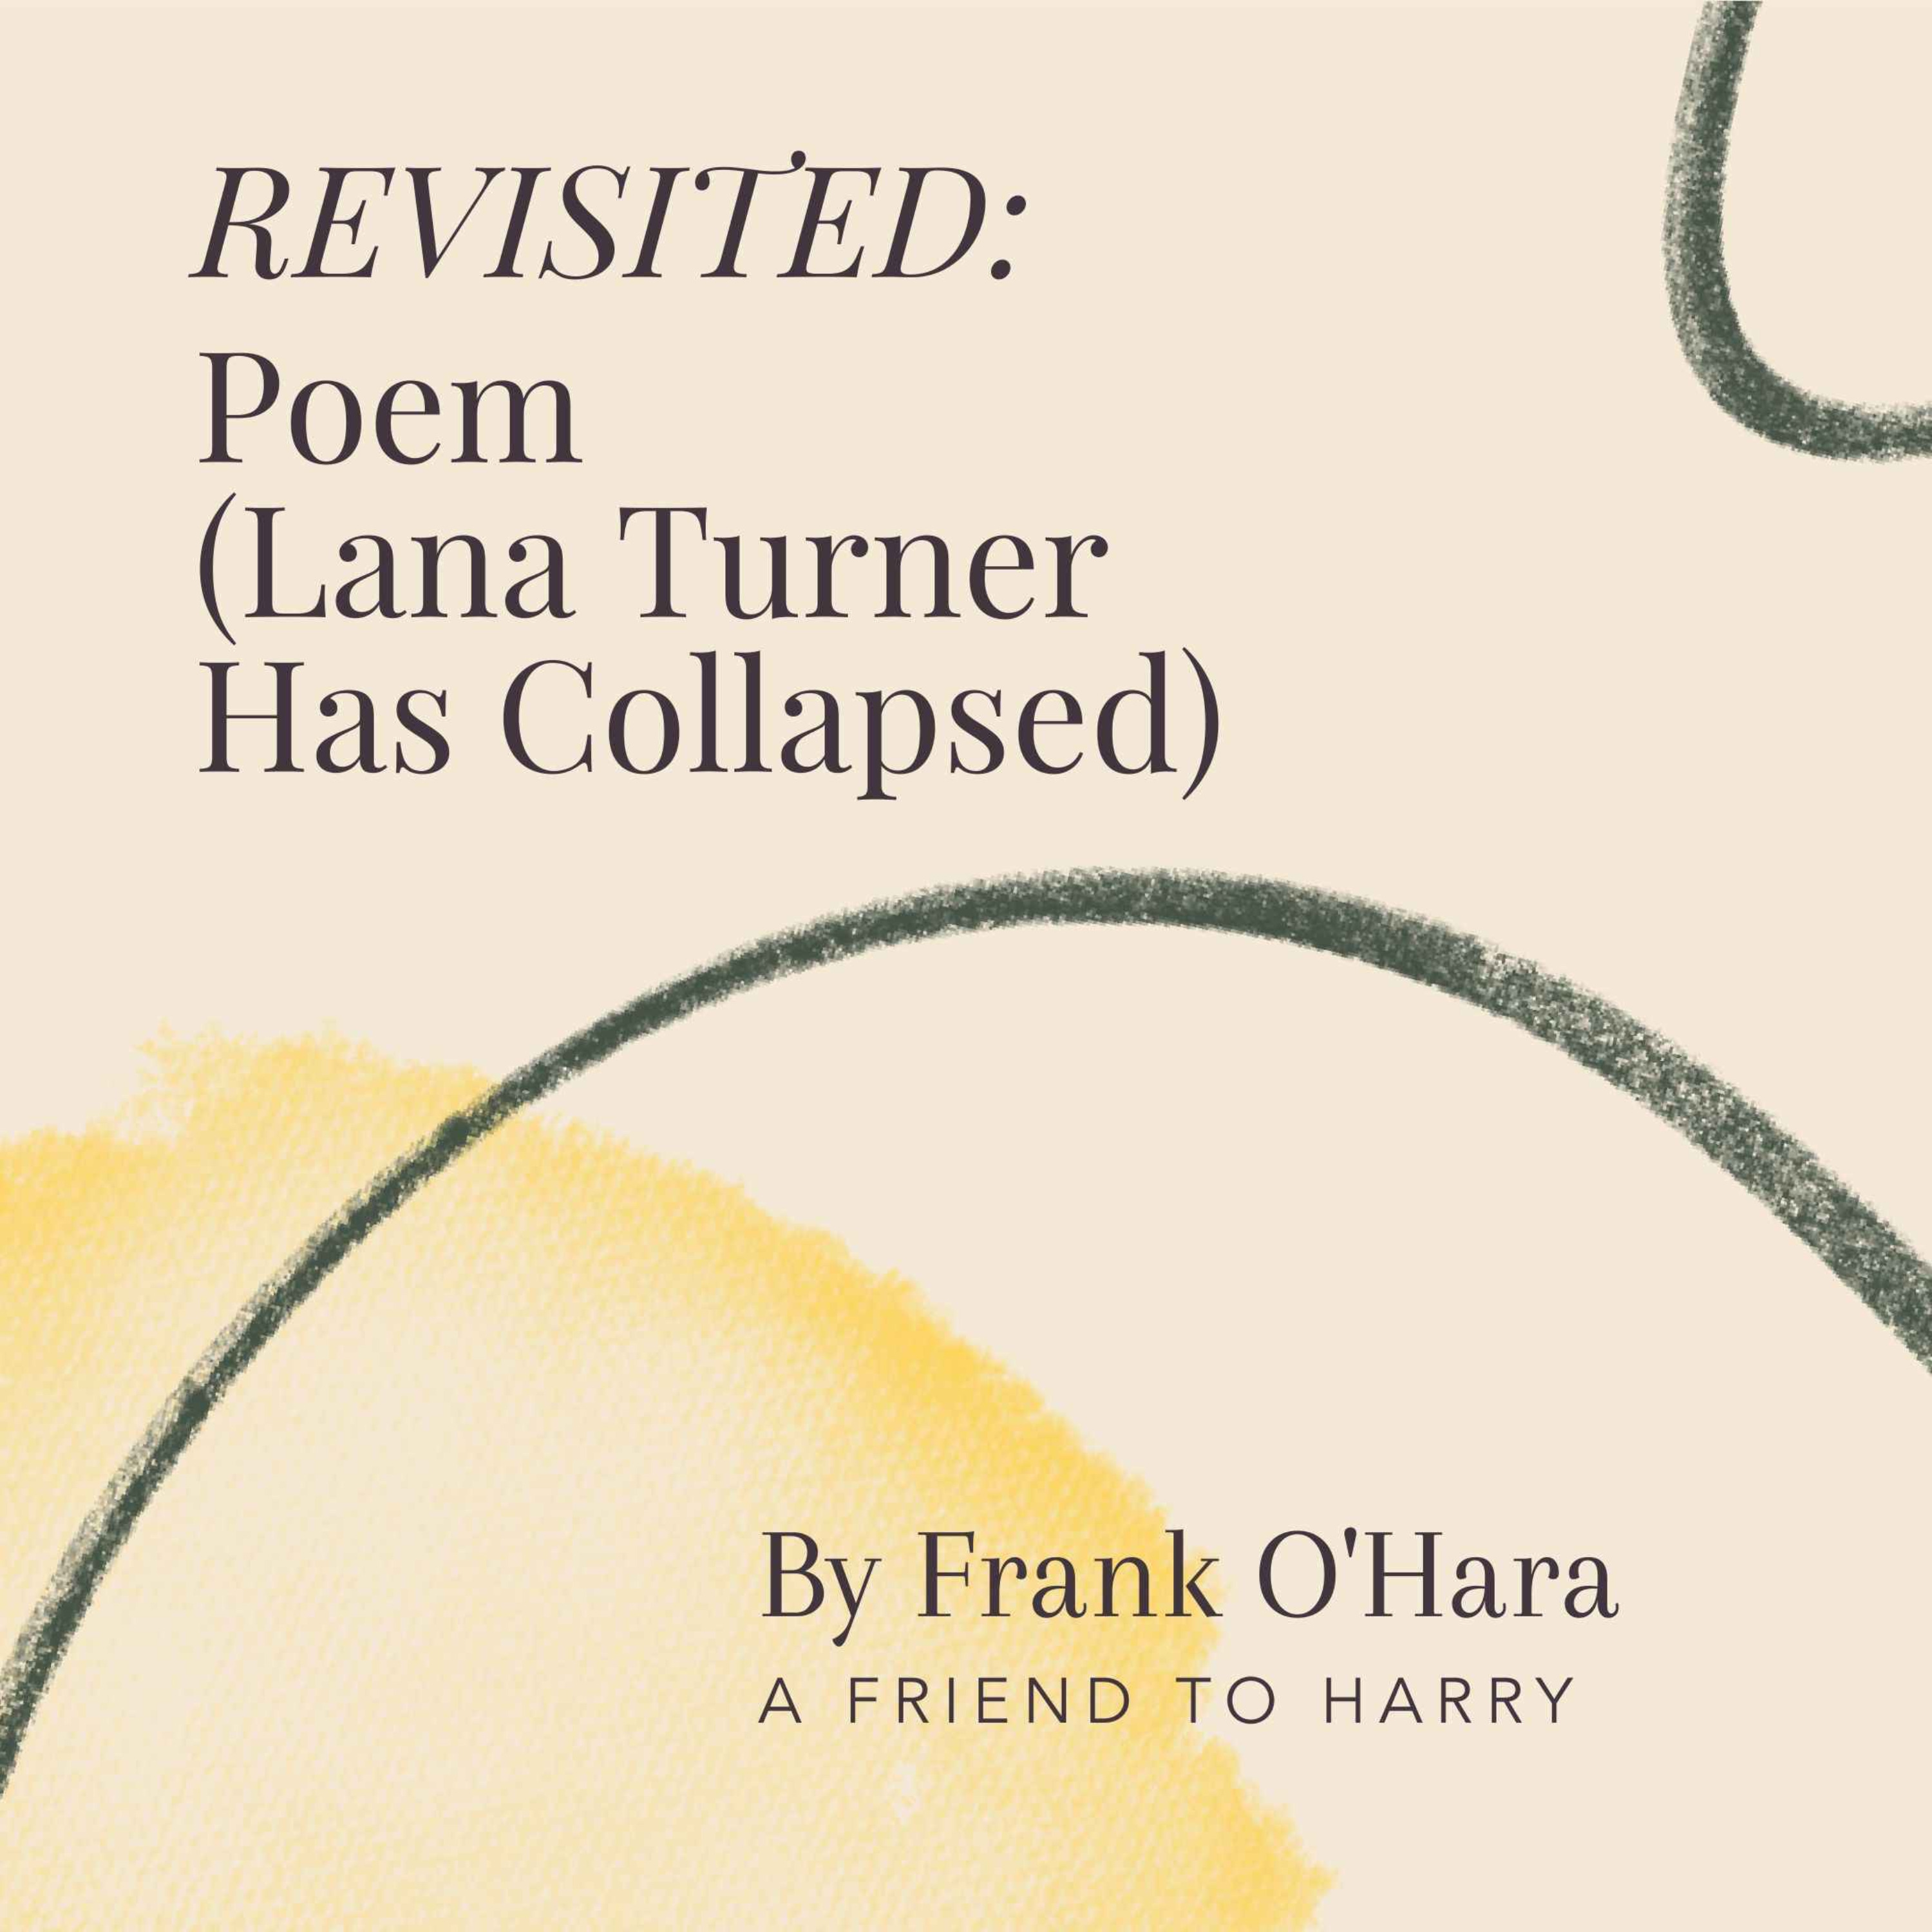 79. REVISITED: Poem (Lana Turner Has Collapsed) by Frank O'Hara - A Friend to Harry